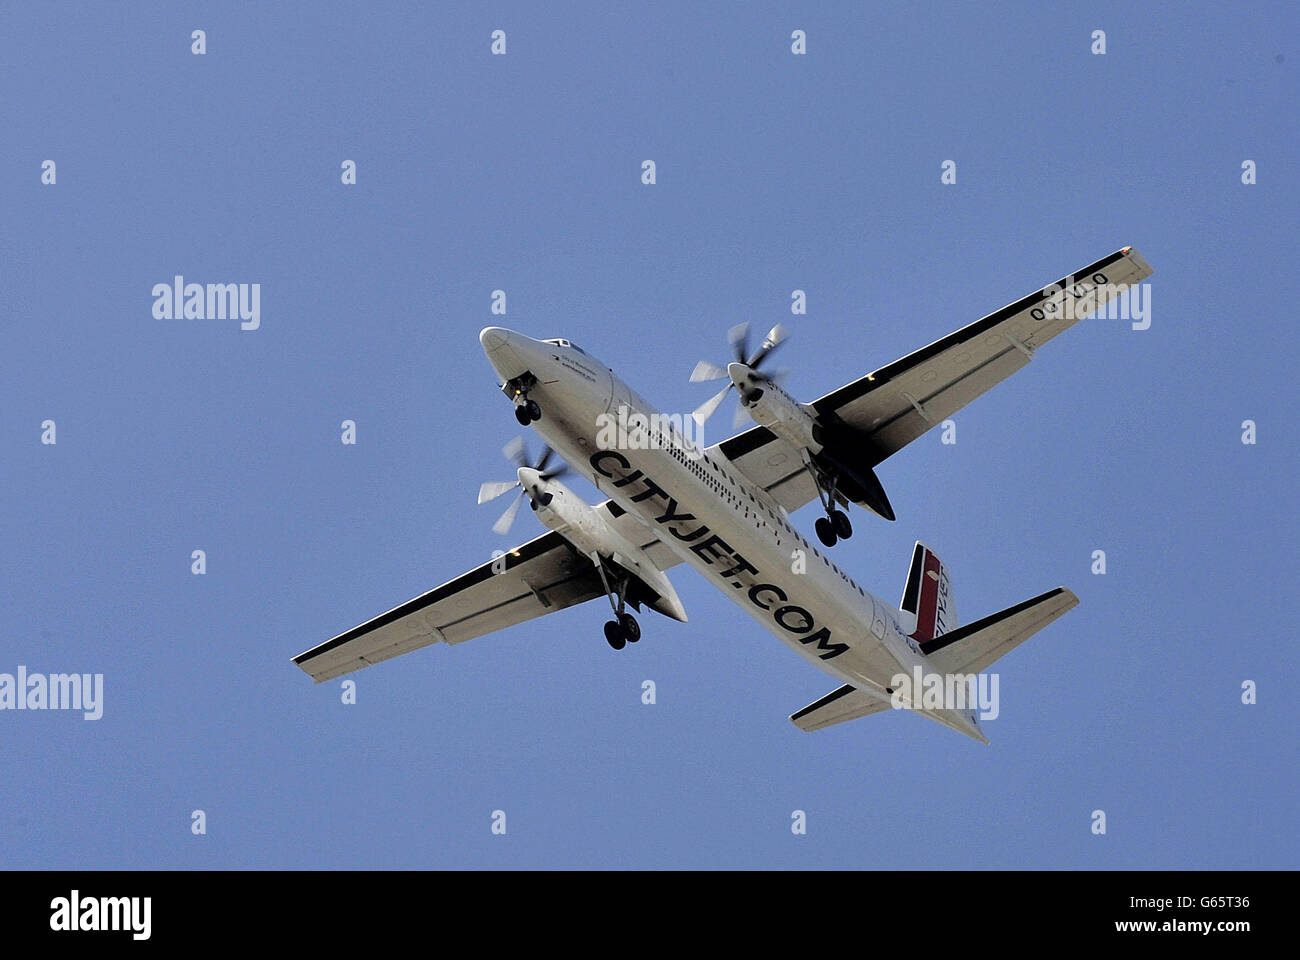 Cityjet.com - stock. A Cityjet turbo prop plane coming in to land at London City Airport. Stock Photo